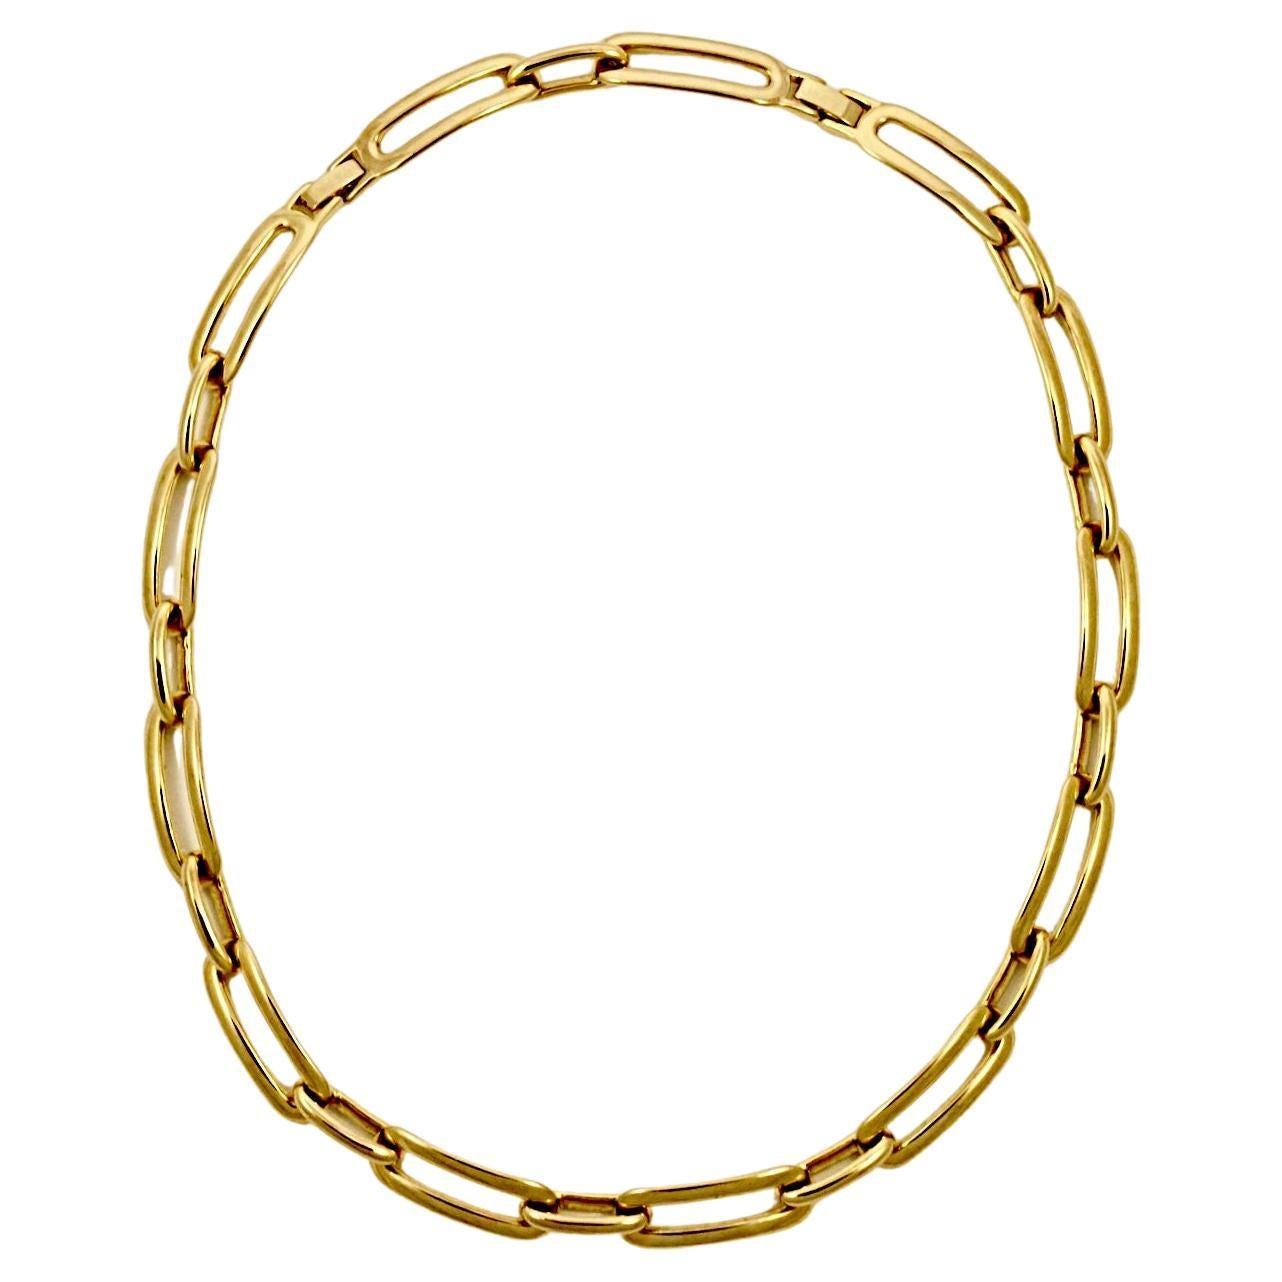 Monet Gold Plated Adjustable Oblong Link Chain Necklace circa 1980s 